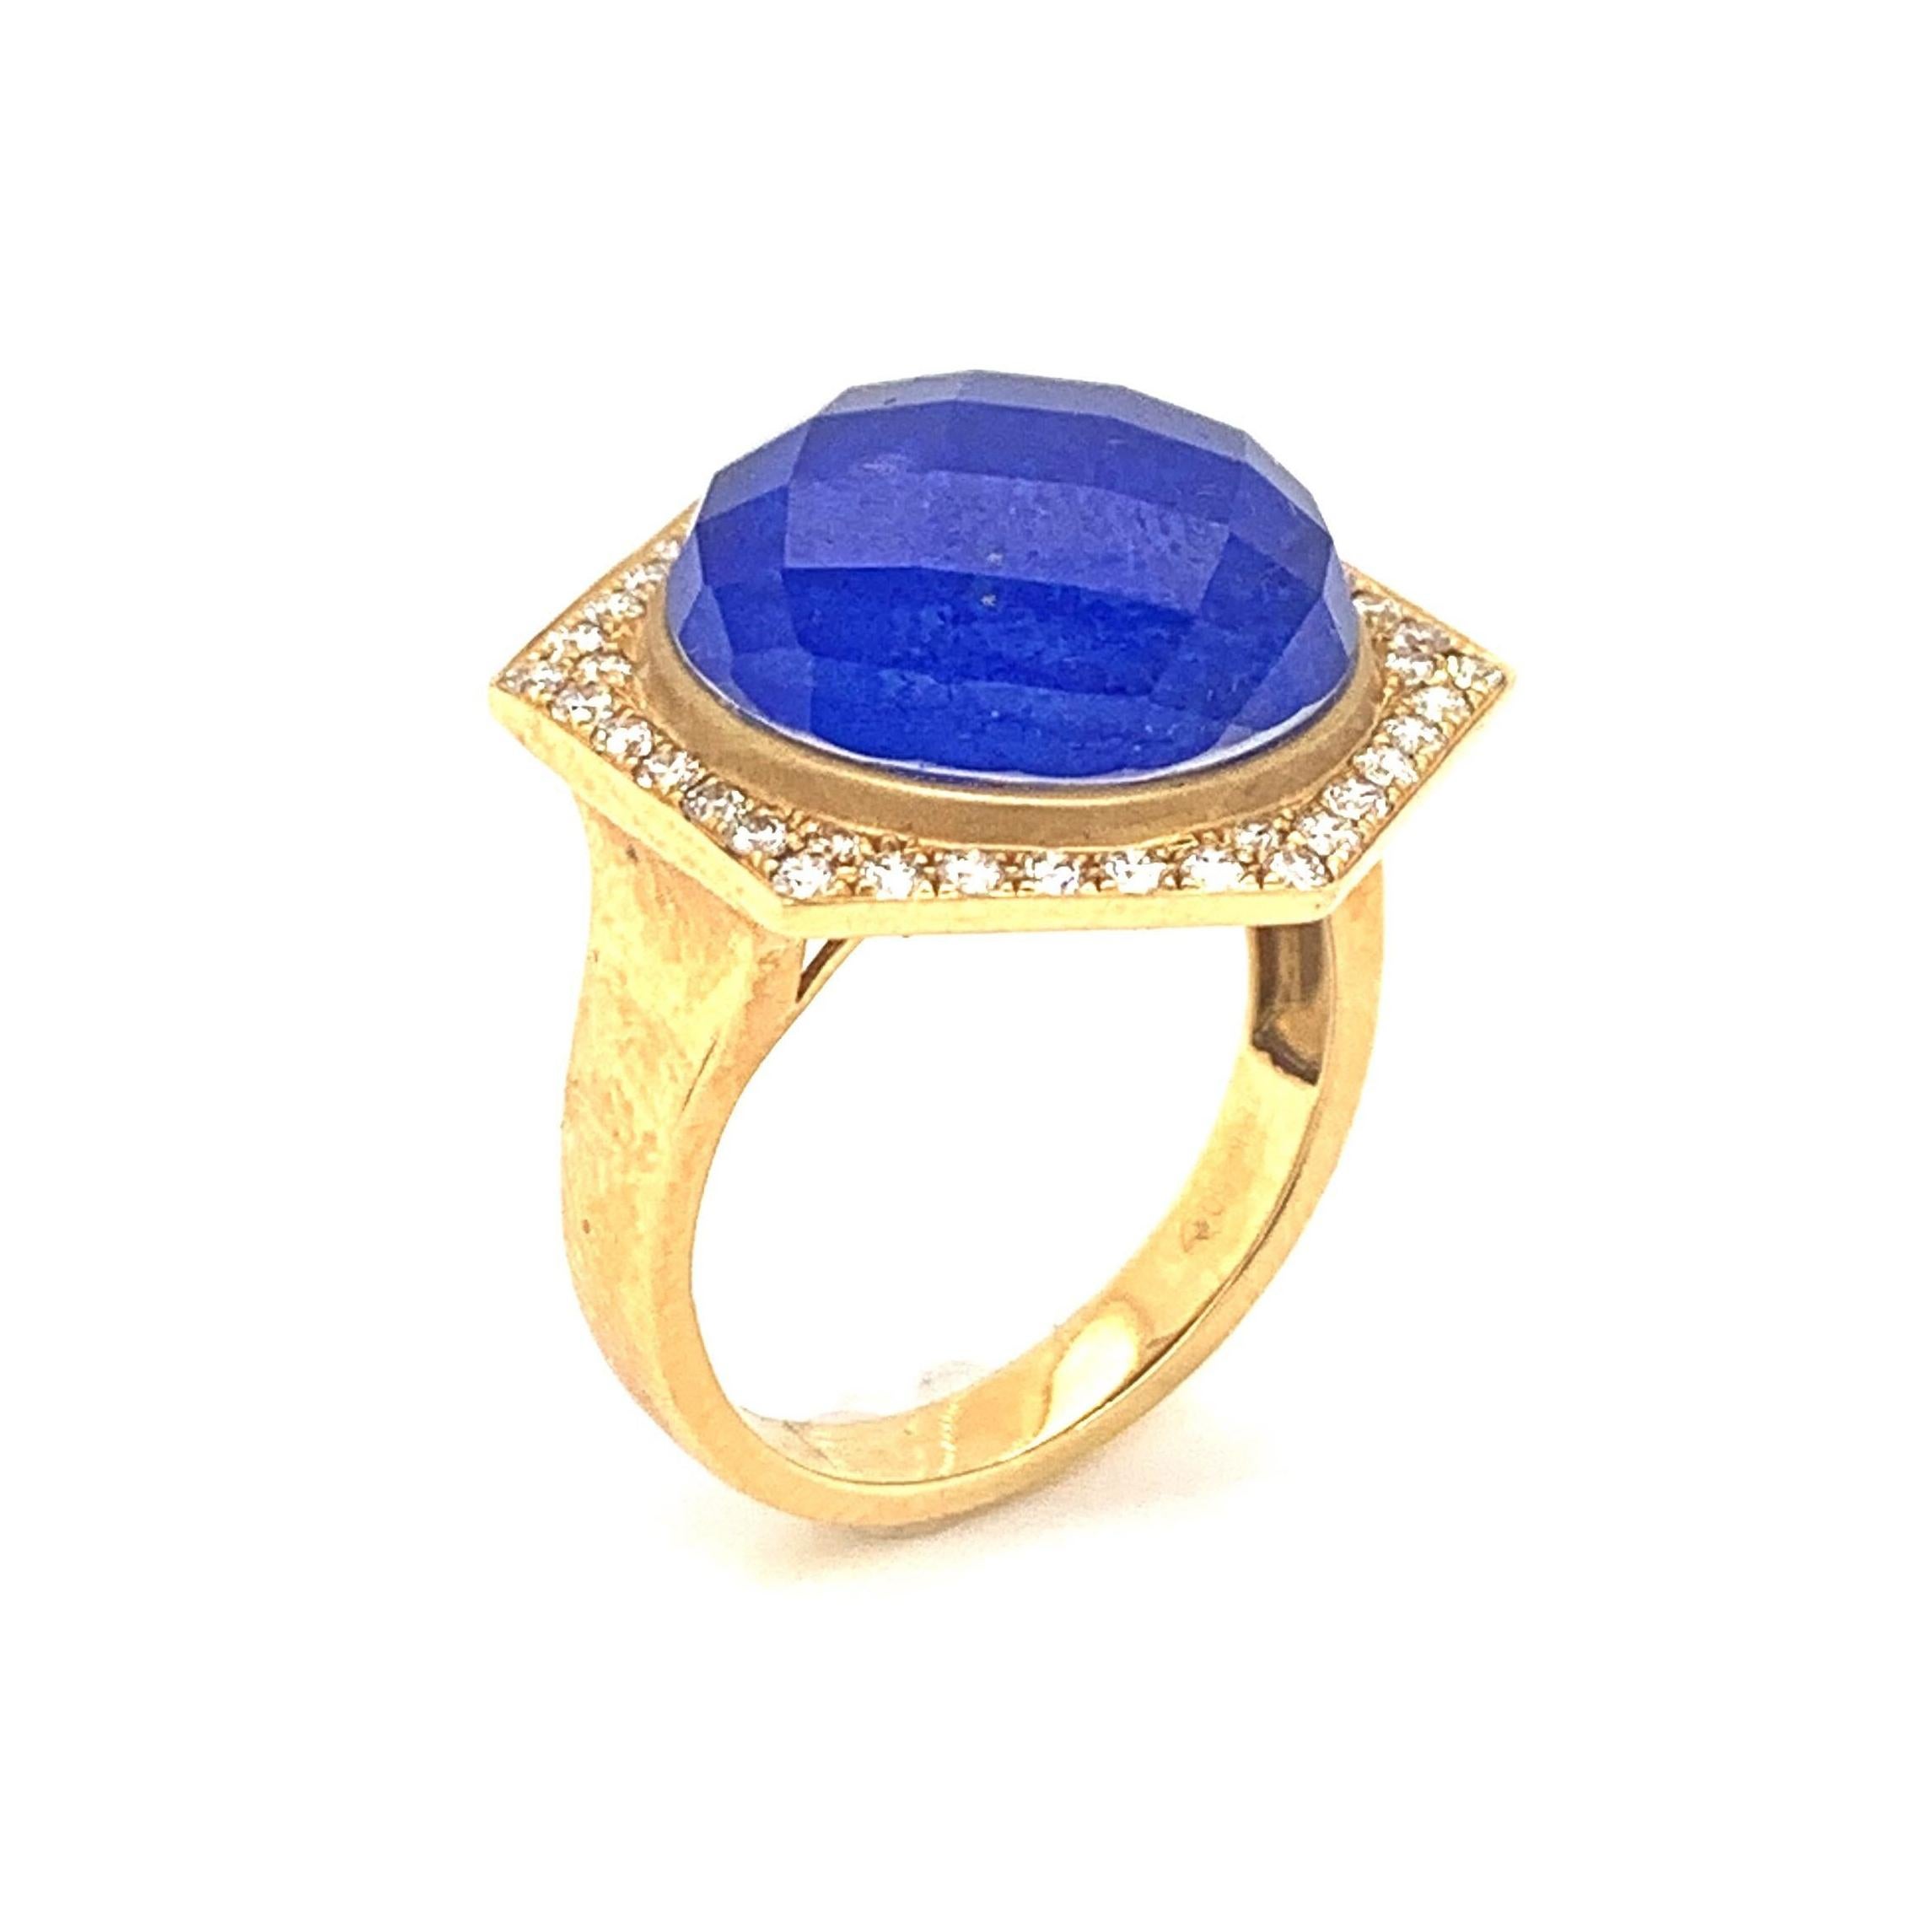 18K Yellow Gold Cocktail Ring with Lapis Lazuli Rock Crystal Quartz and Diamonds In New Condition For Sale In Great Neck, NY